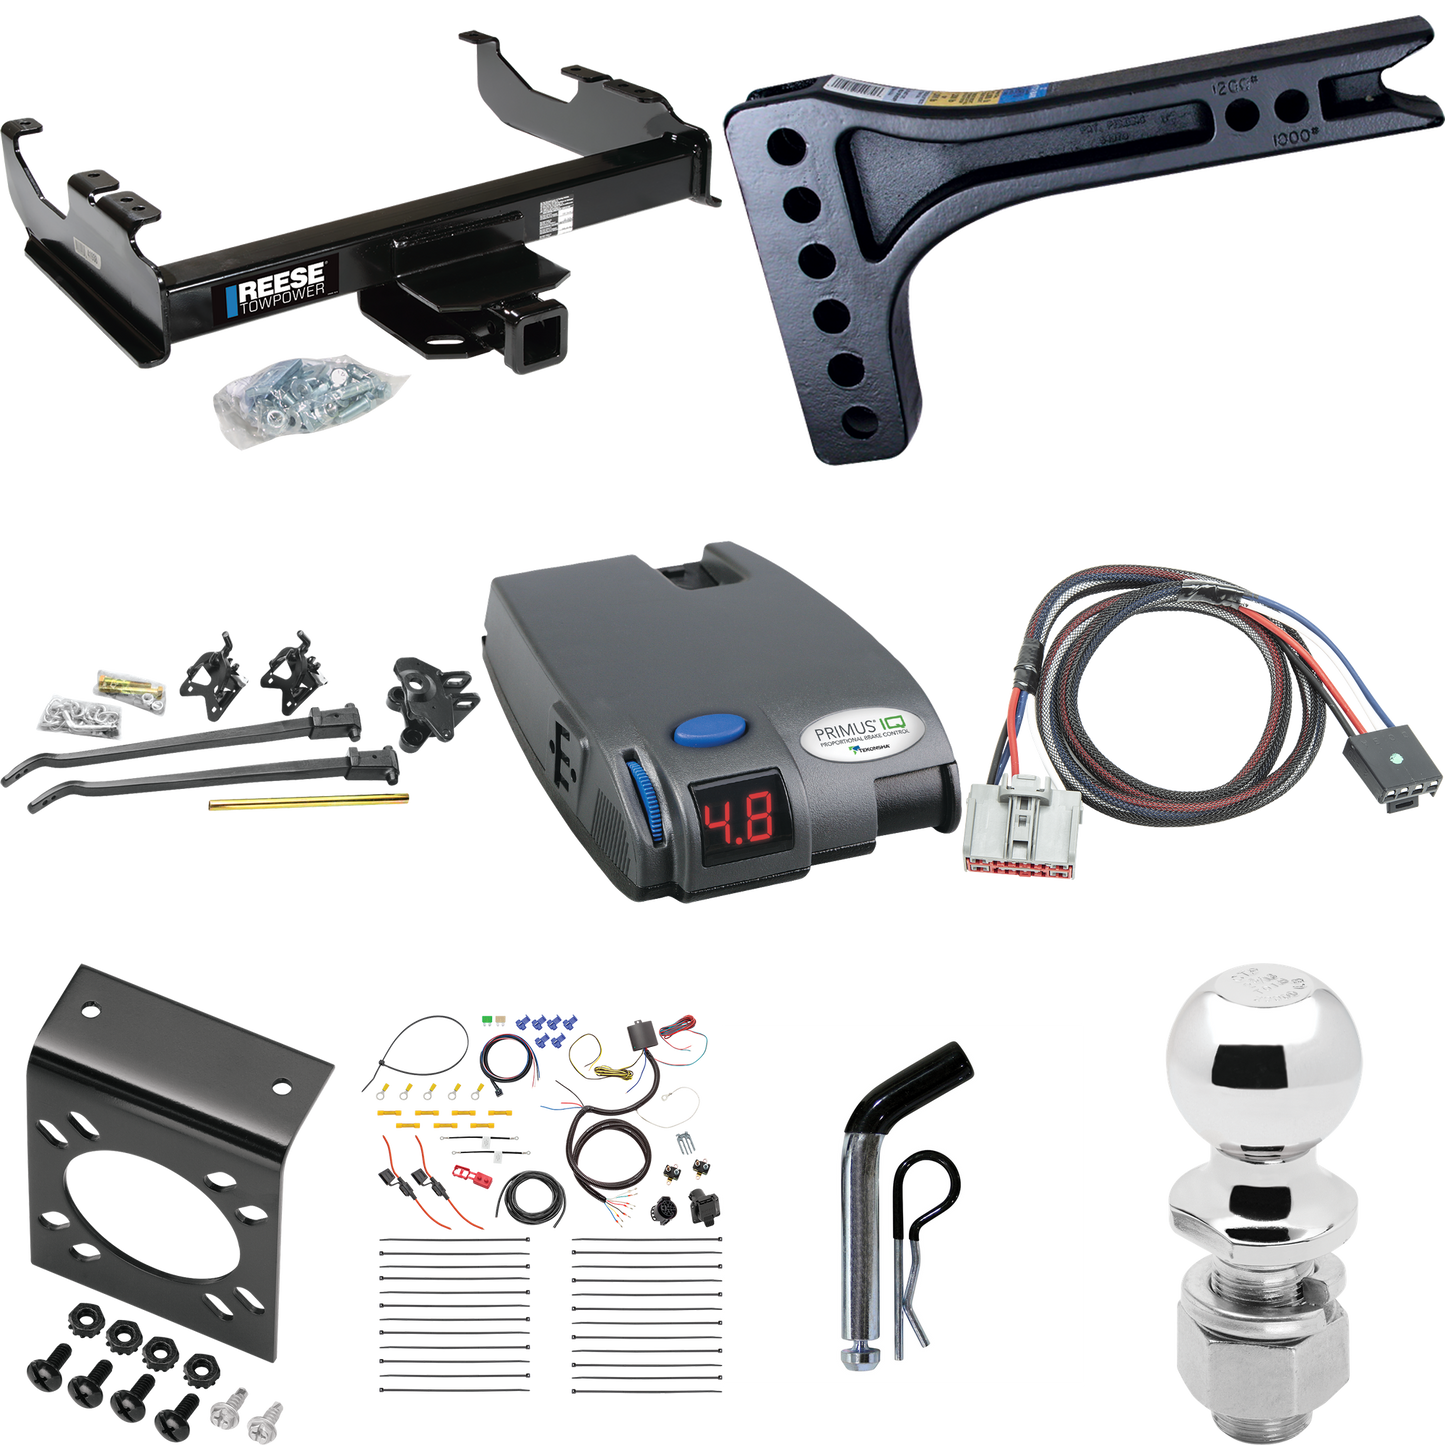 Fits 2020-2023 GMC Sierra 3500 HD Trailer Hitch Tow PKG w/ 15K Trunnion Bar Weight Distribution Hitch + Pin/Clip + 2-5/16" Ball + Tekonsha Primus IQ Brake Control + Plug & Play BC Adapter + 7-Way RV Wiring (For Cab & Chassis, w/34" Wide Frames Models